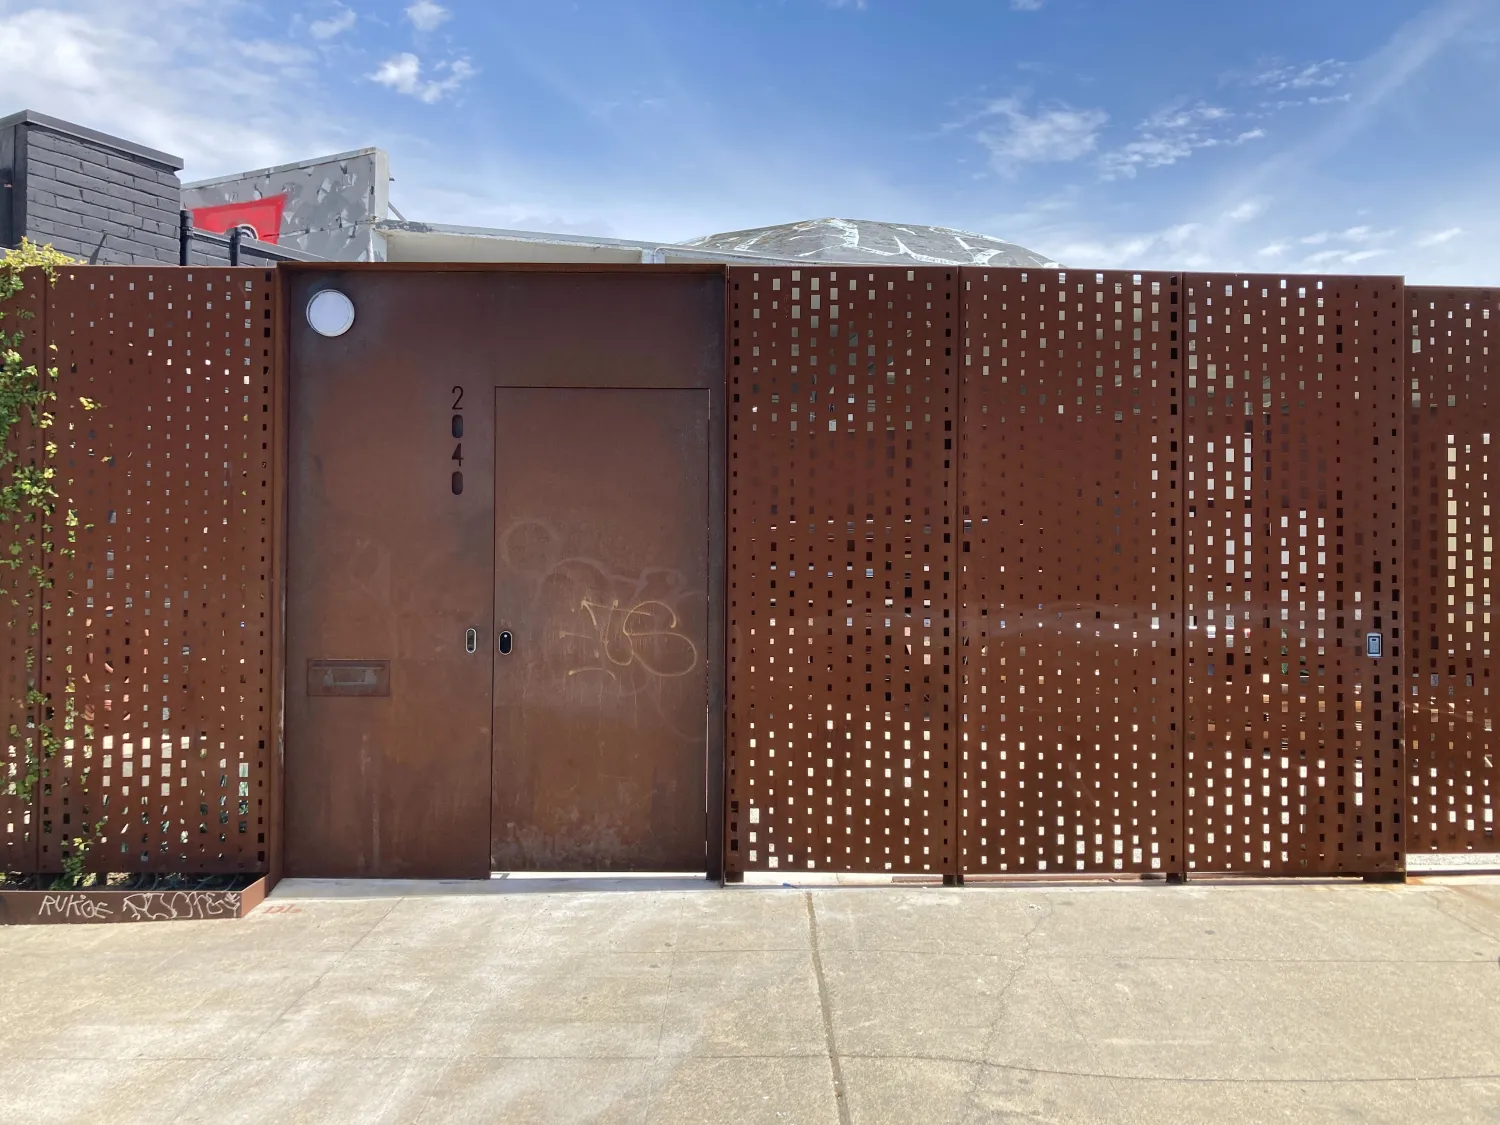 Cor-ten steel fence enclosing the courtyard at David Baker Architects Office in Oakland, California.